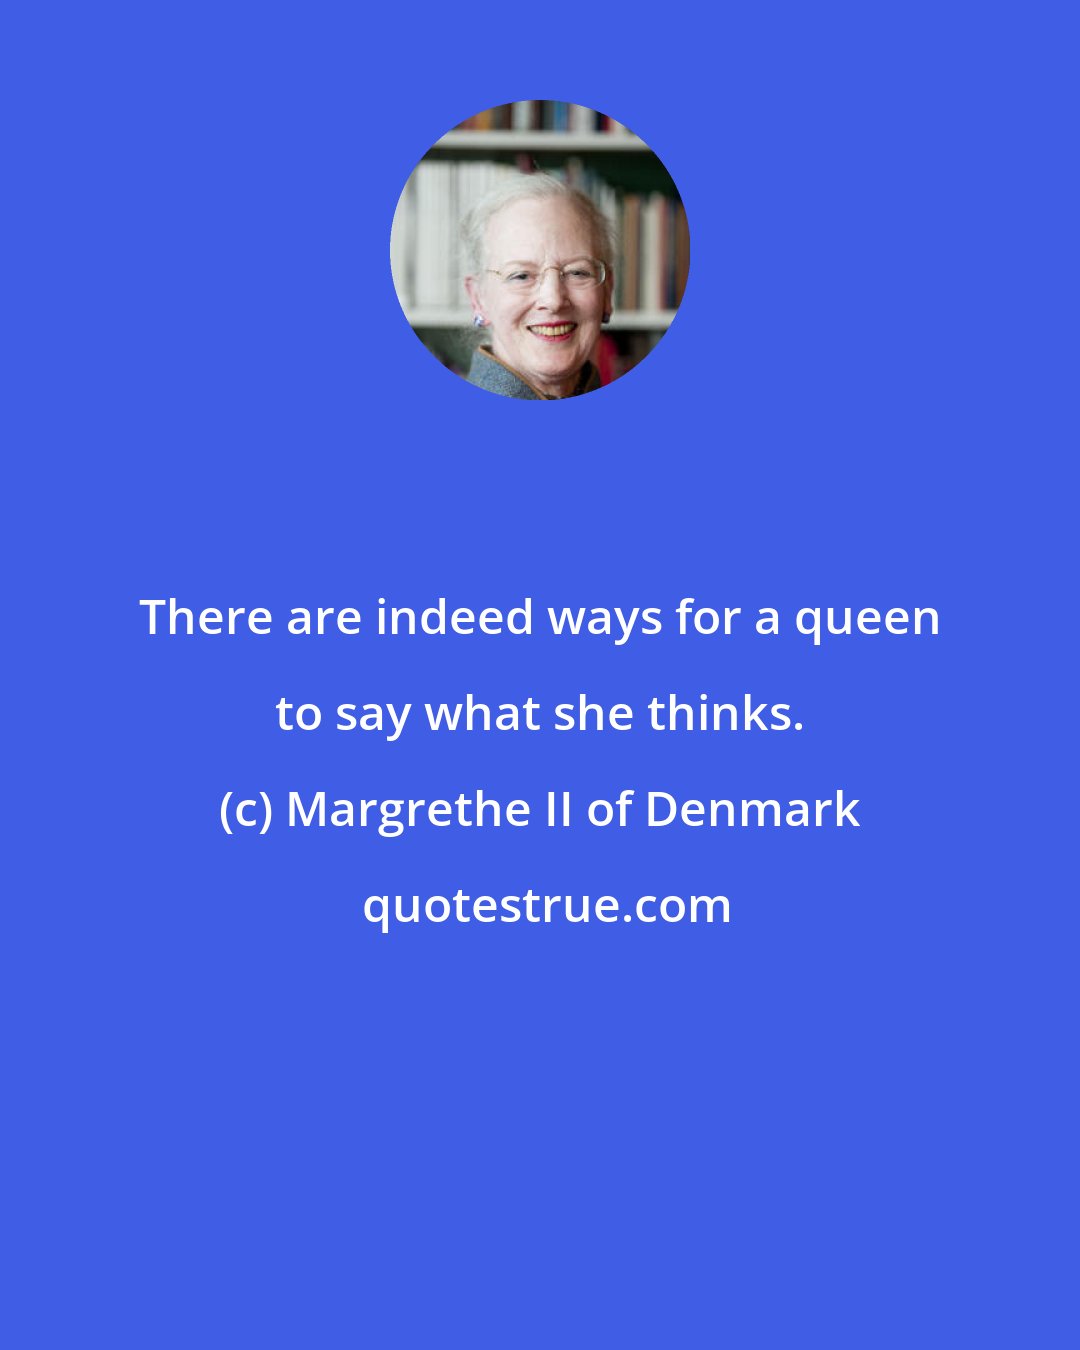 Margrethe II of Denmark: There are indeed ways for a queen to say what she thinks.